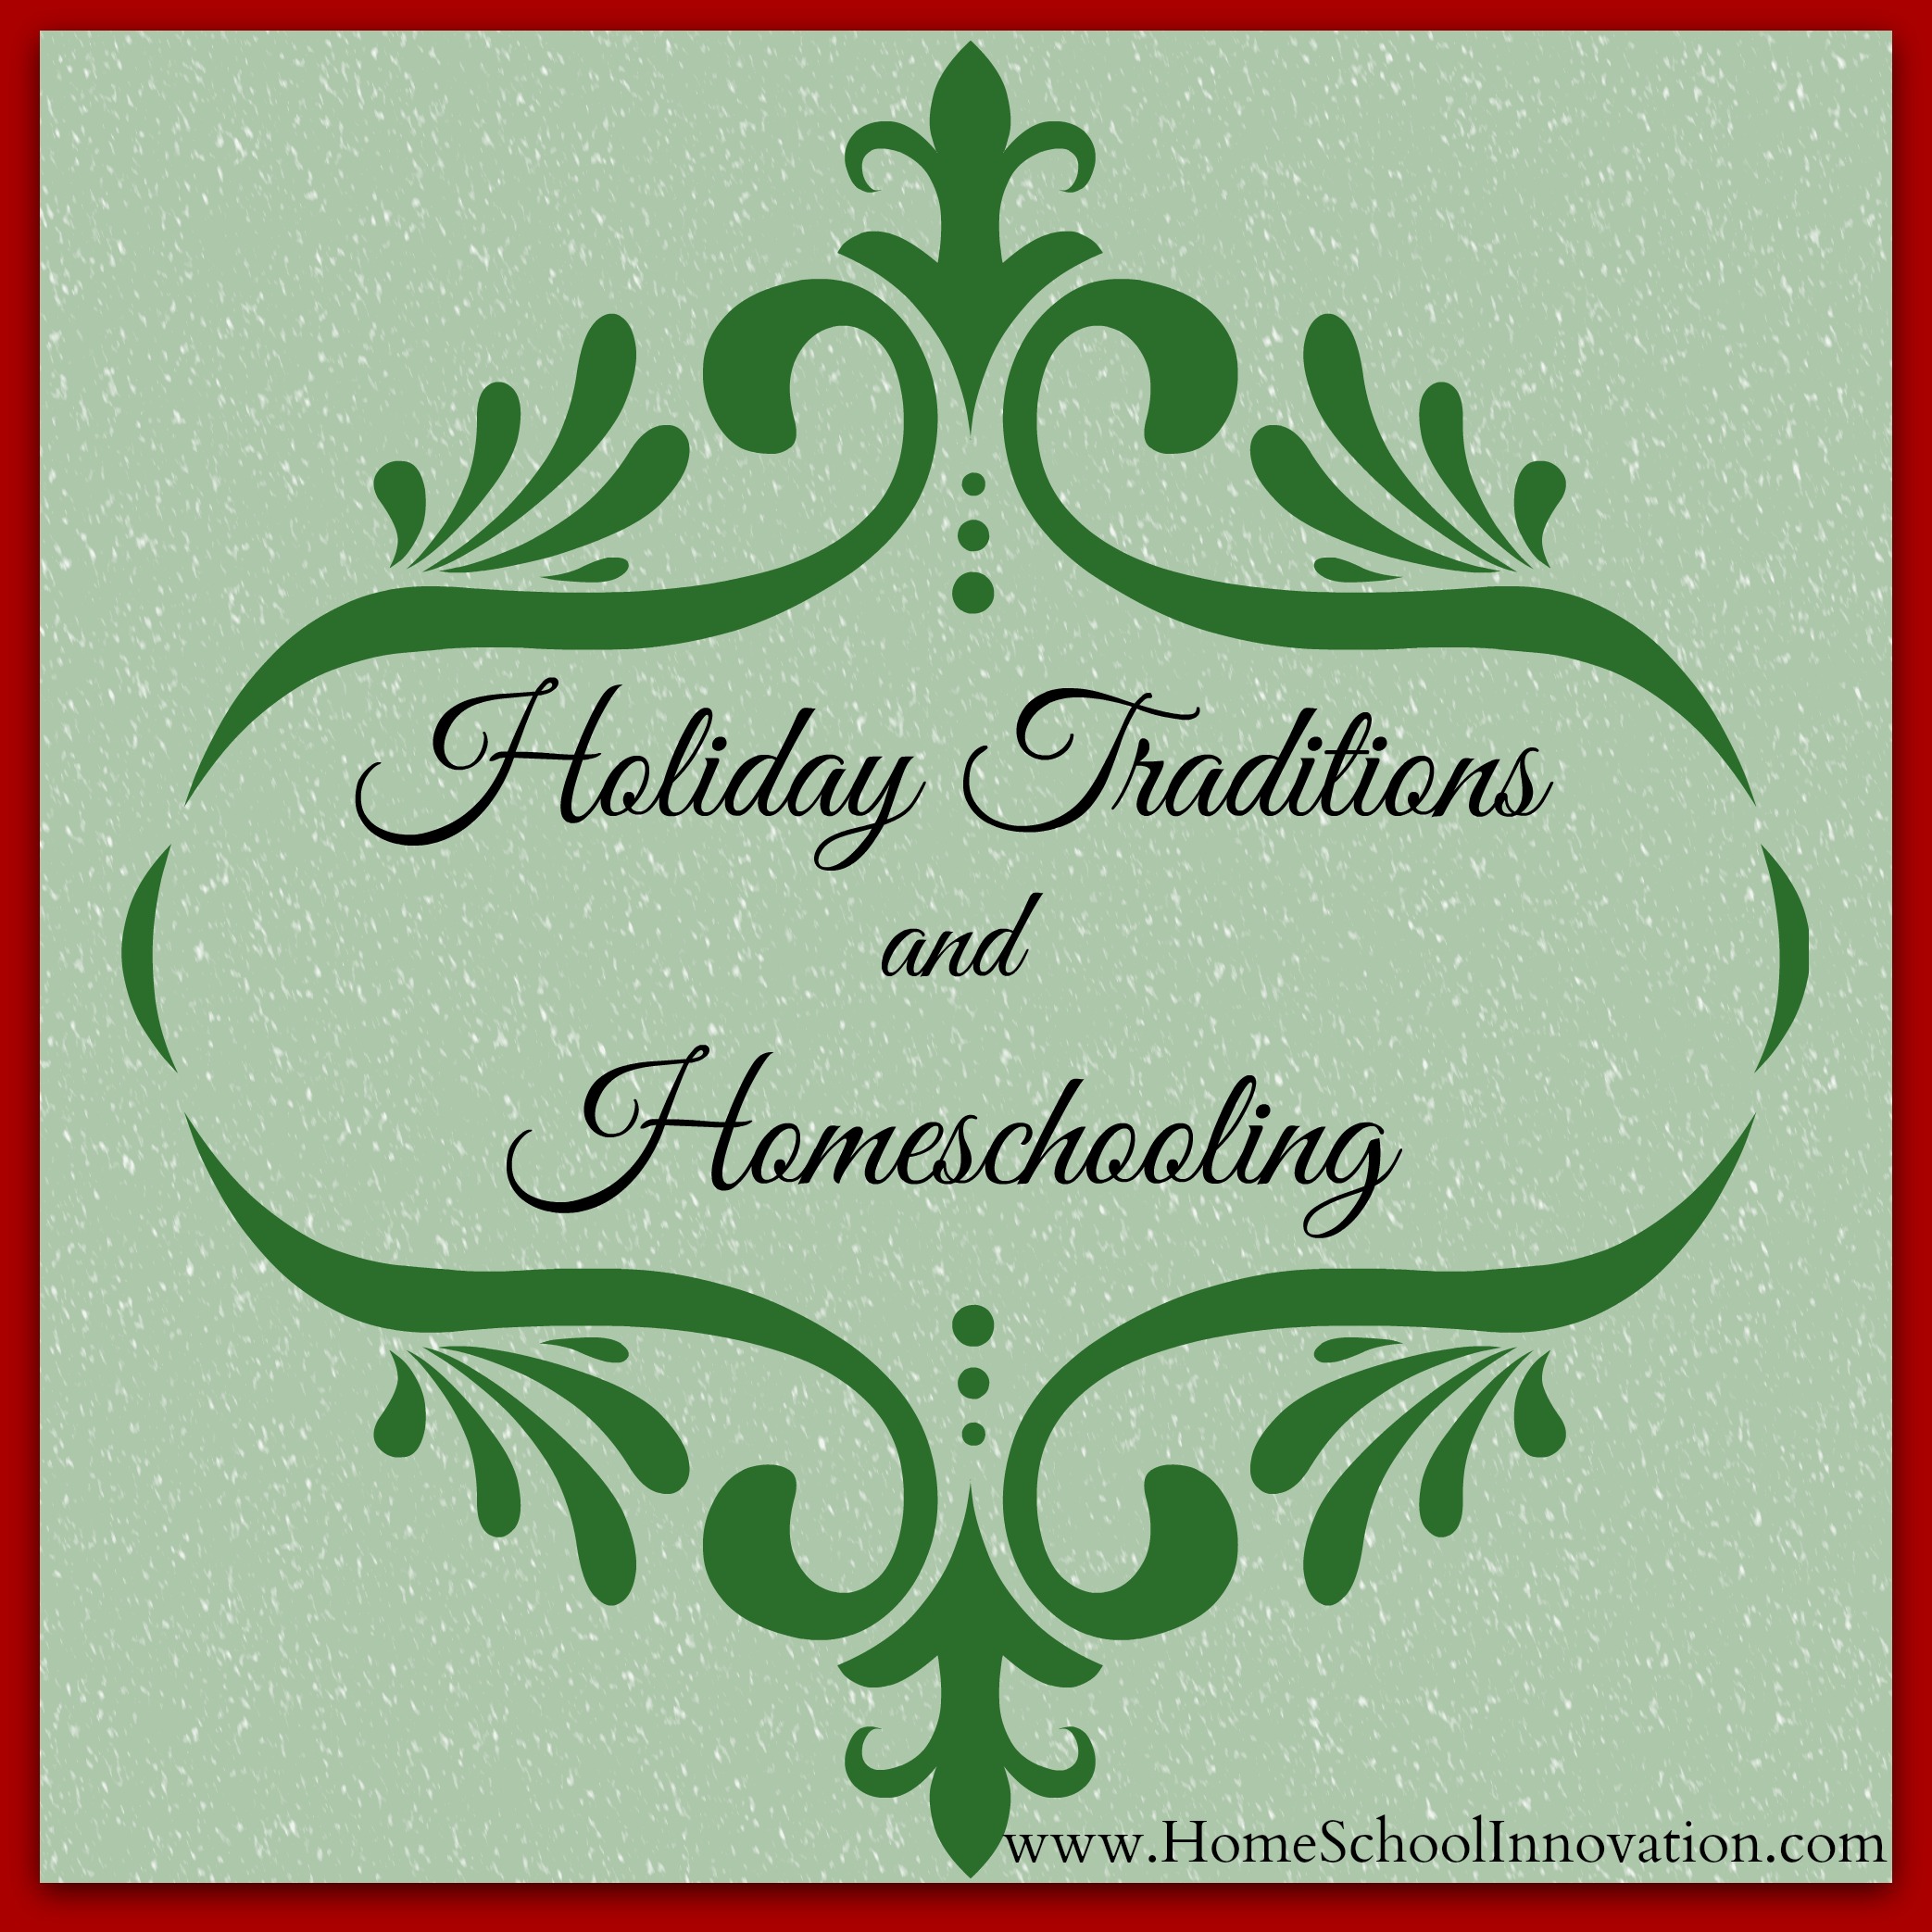 Holiday Traditions and Homeschooling